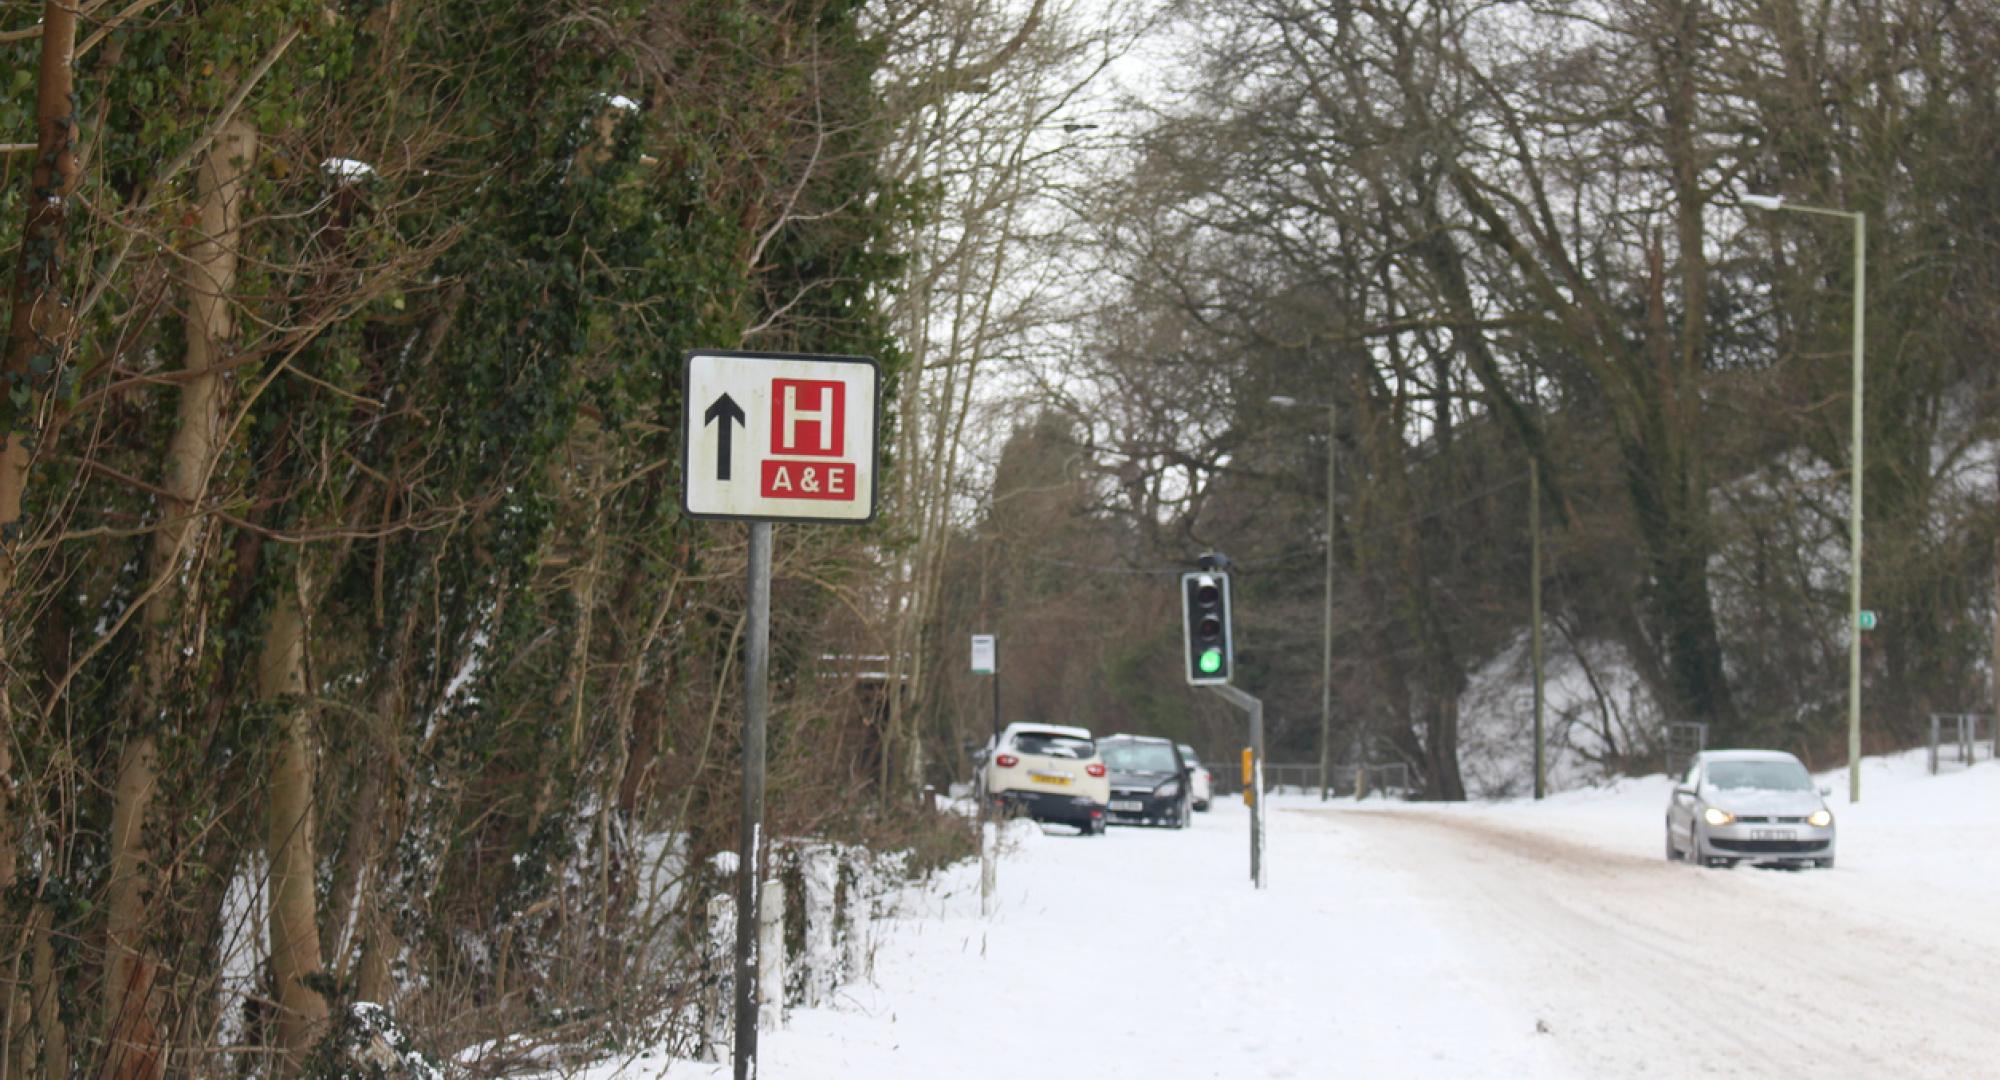 Hospital sign on a snowy road depicting NHS winter pressures